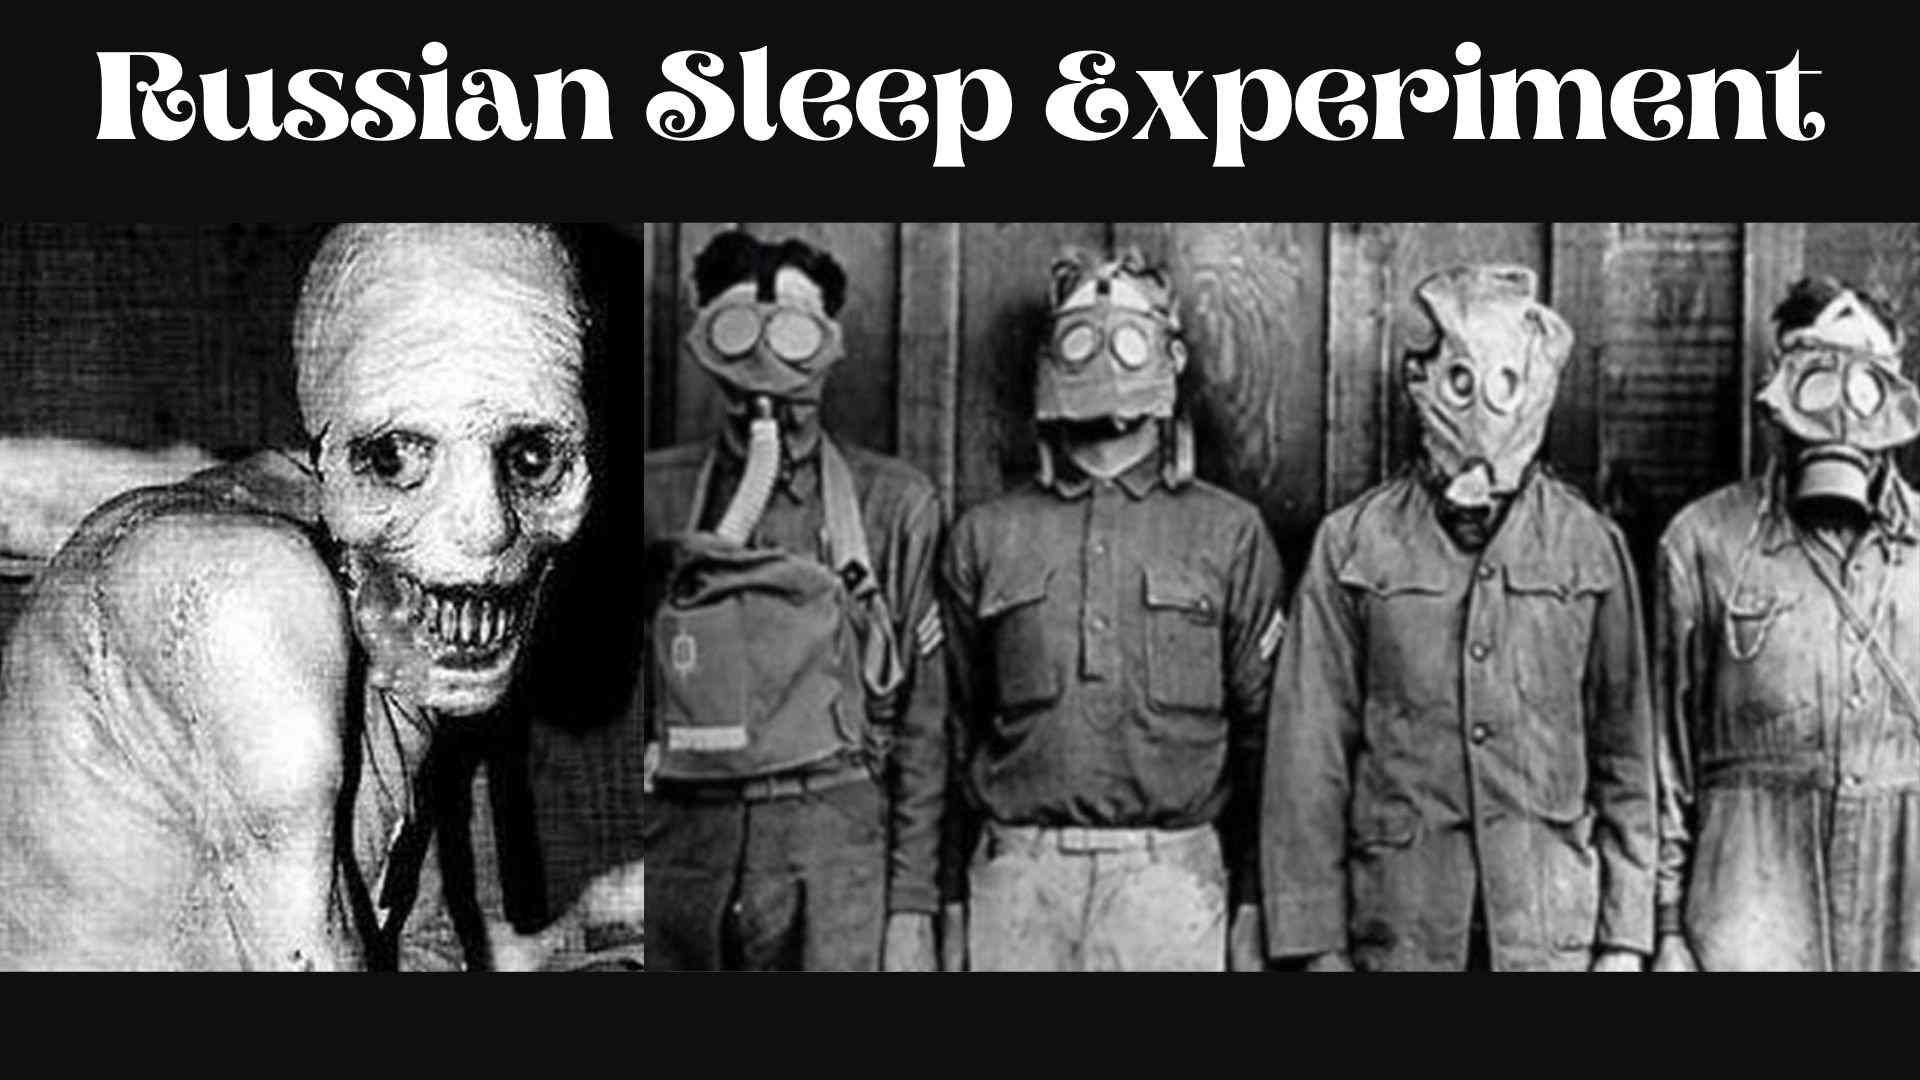 Russian Sleep Experiment Film wallpaper and images